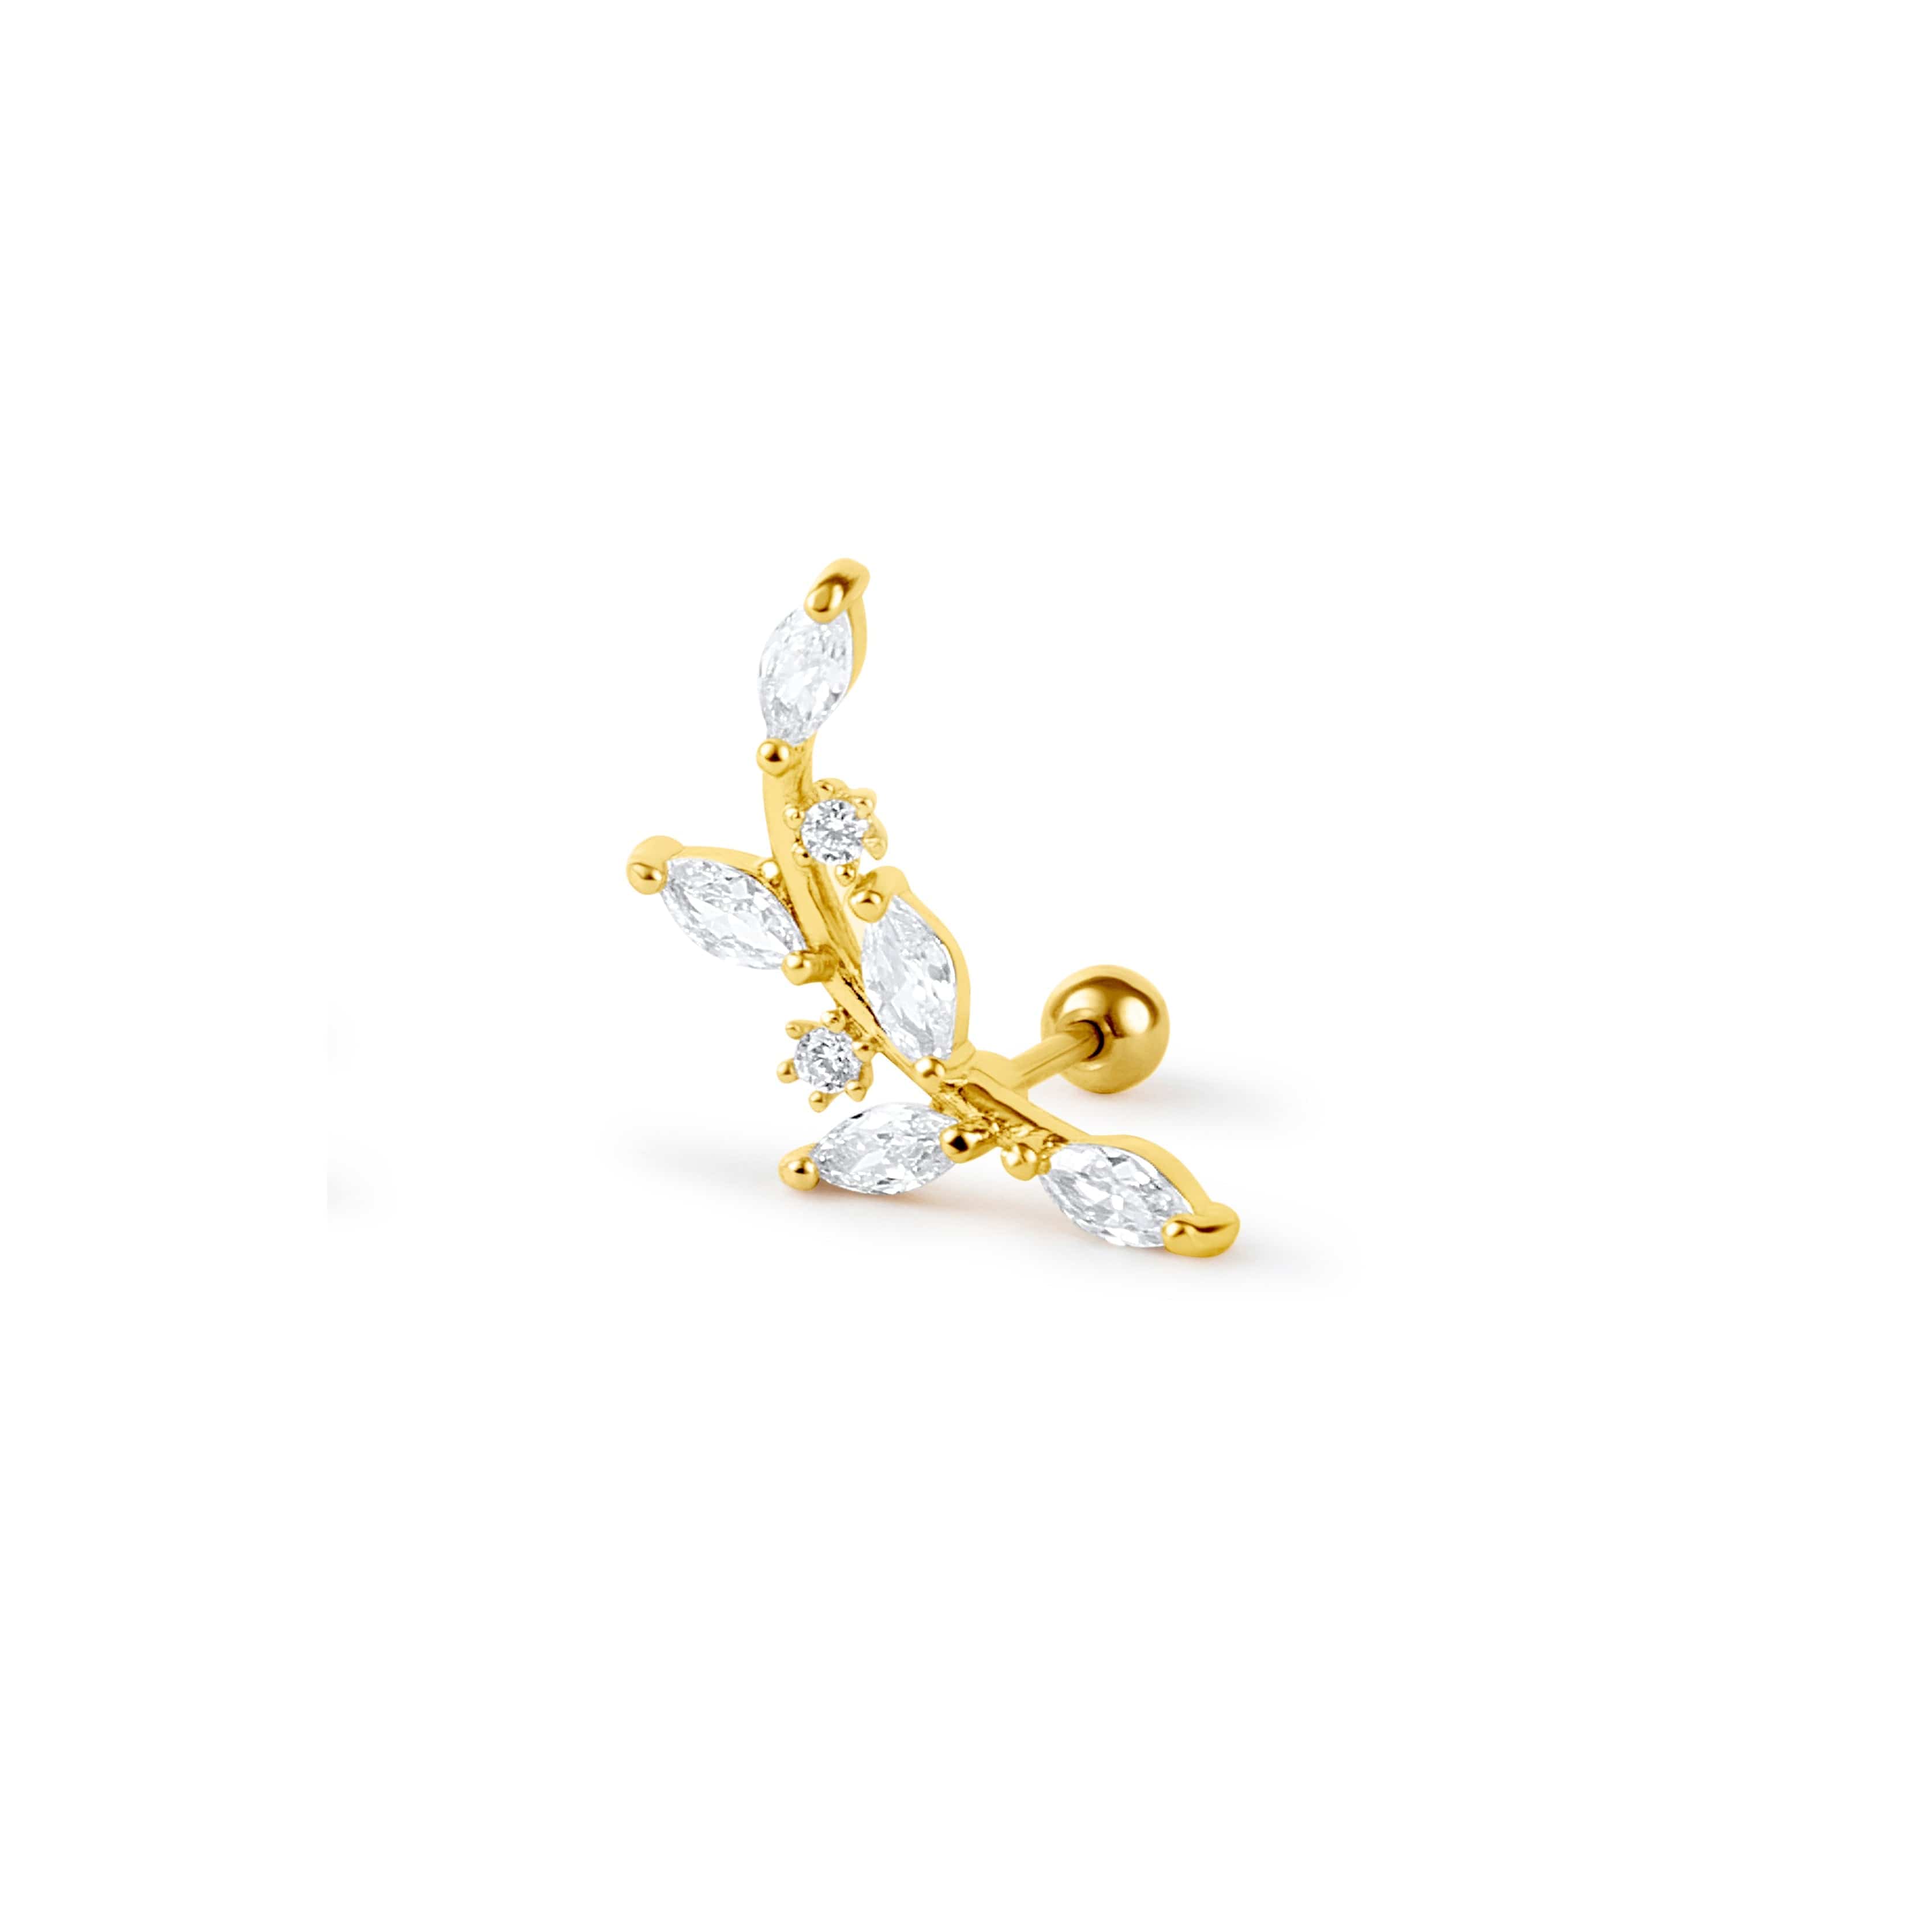 Twilight London Helix Piercing Gold / Left Curved Floral Crawler Piercing